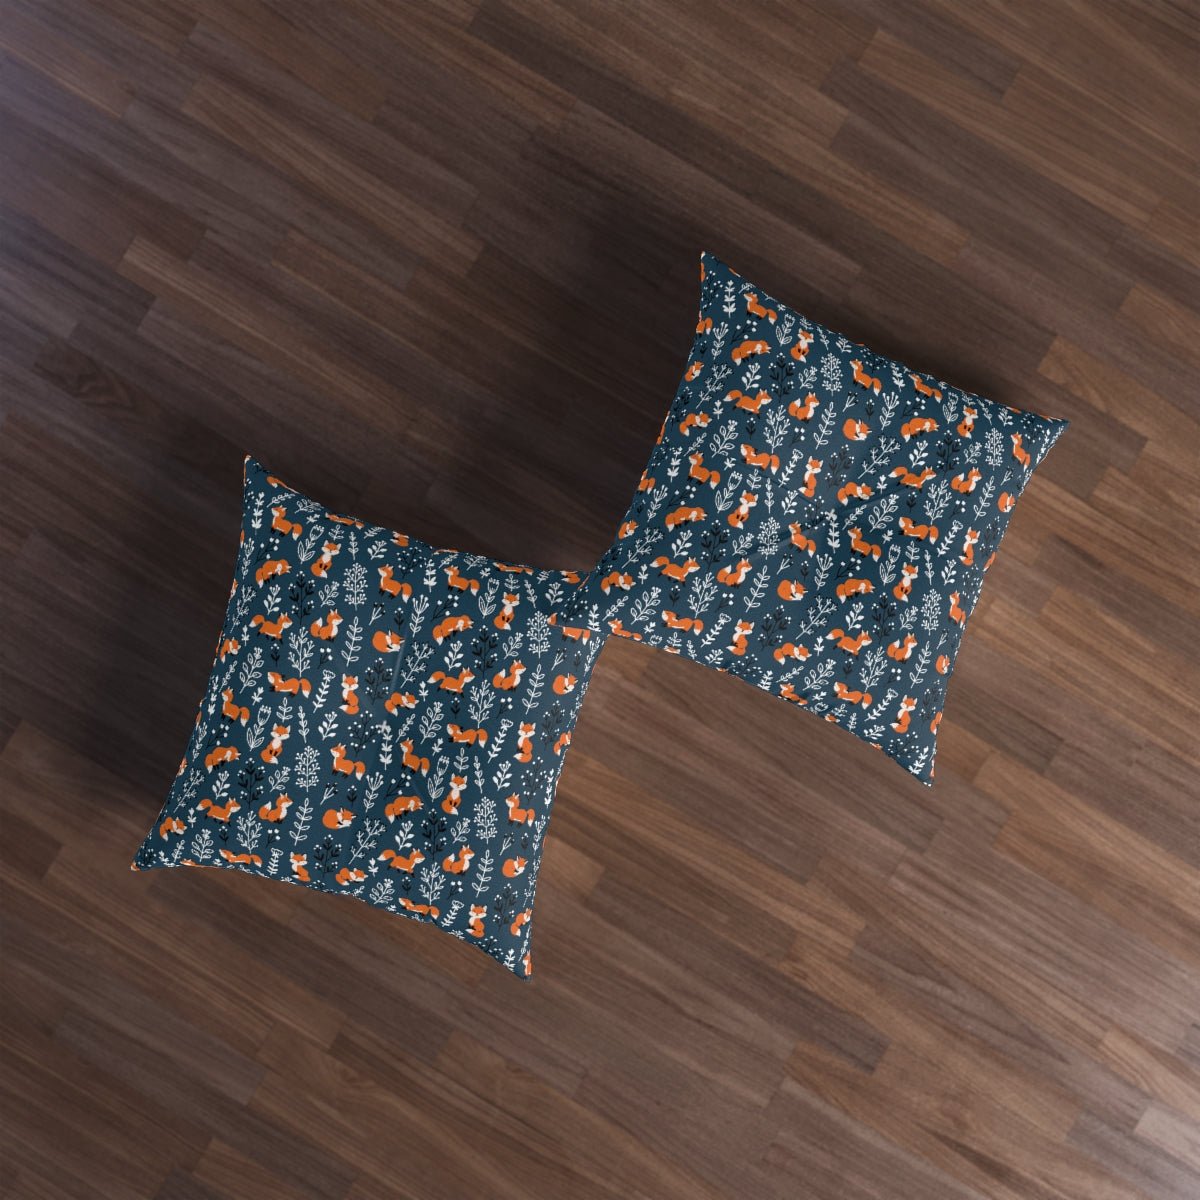 Happy Foxes Tufted Square Floor Pillow - Puffin Lime